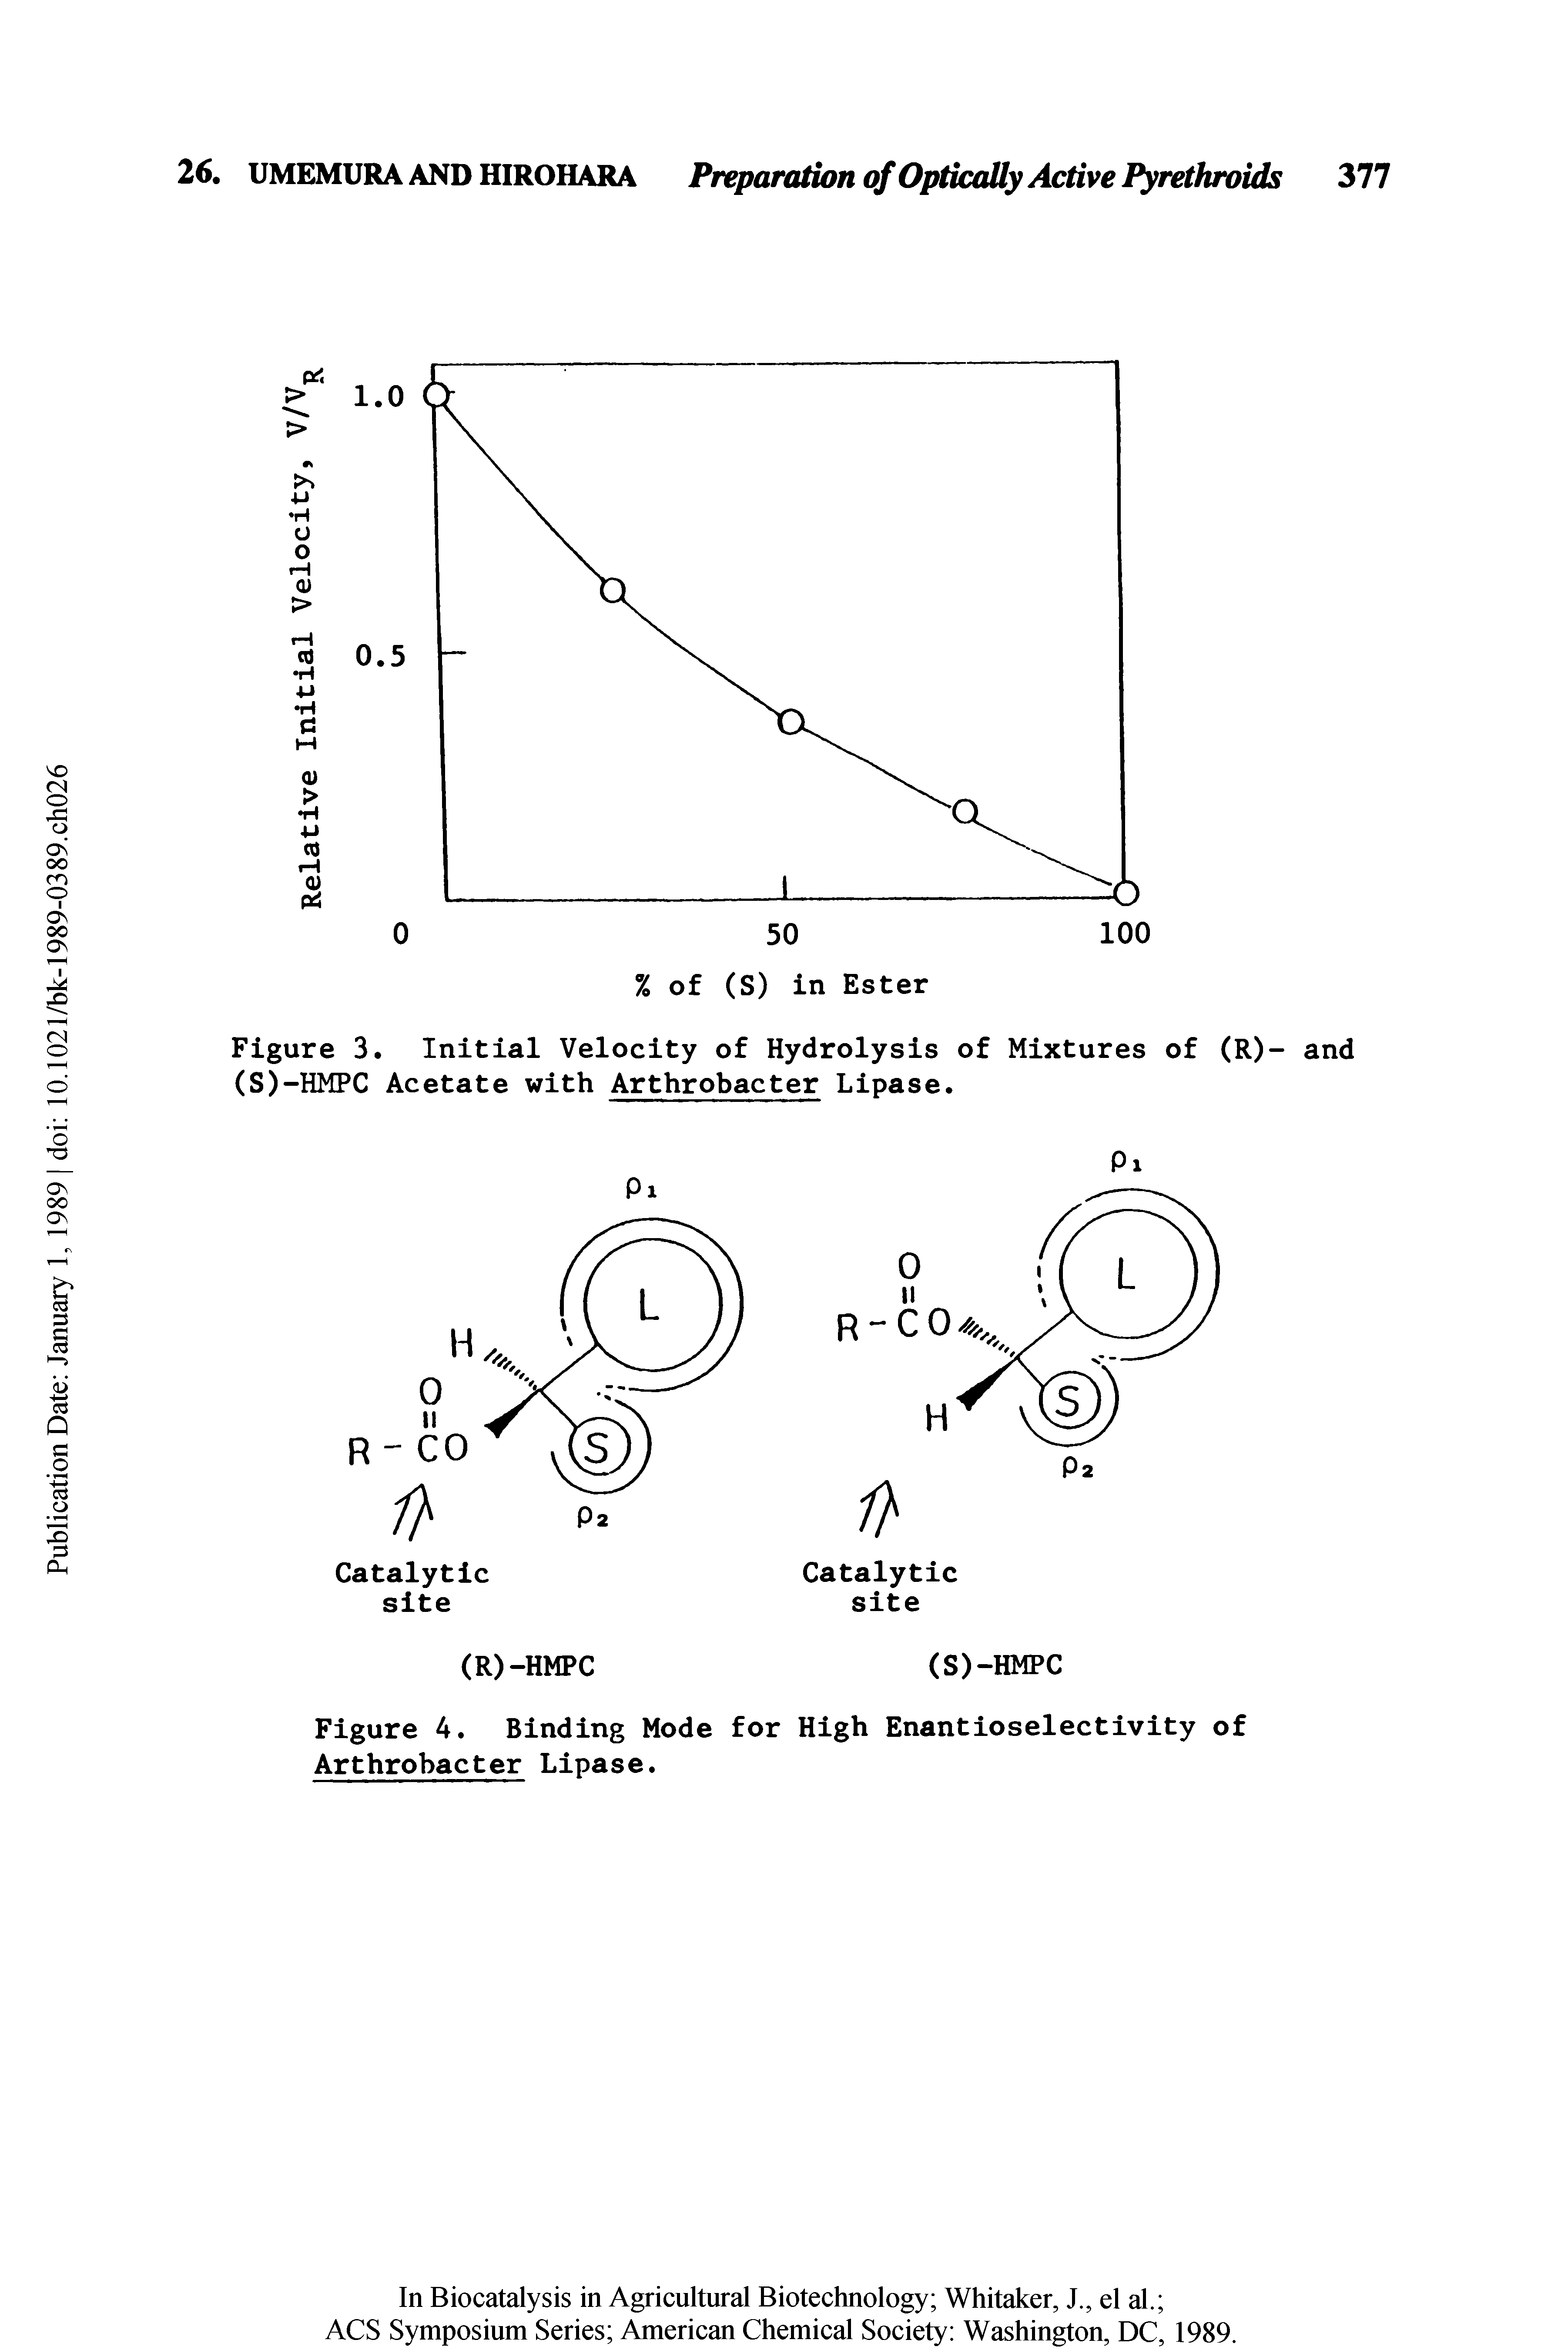 Figure 3. Initial Velocity of Hydrolysis of Mixtures of (R)- and (S)-HMPC Acetate with Arthrobacter Lipase.